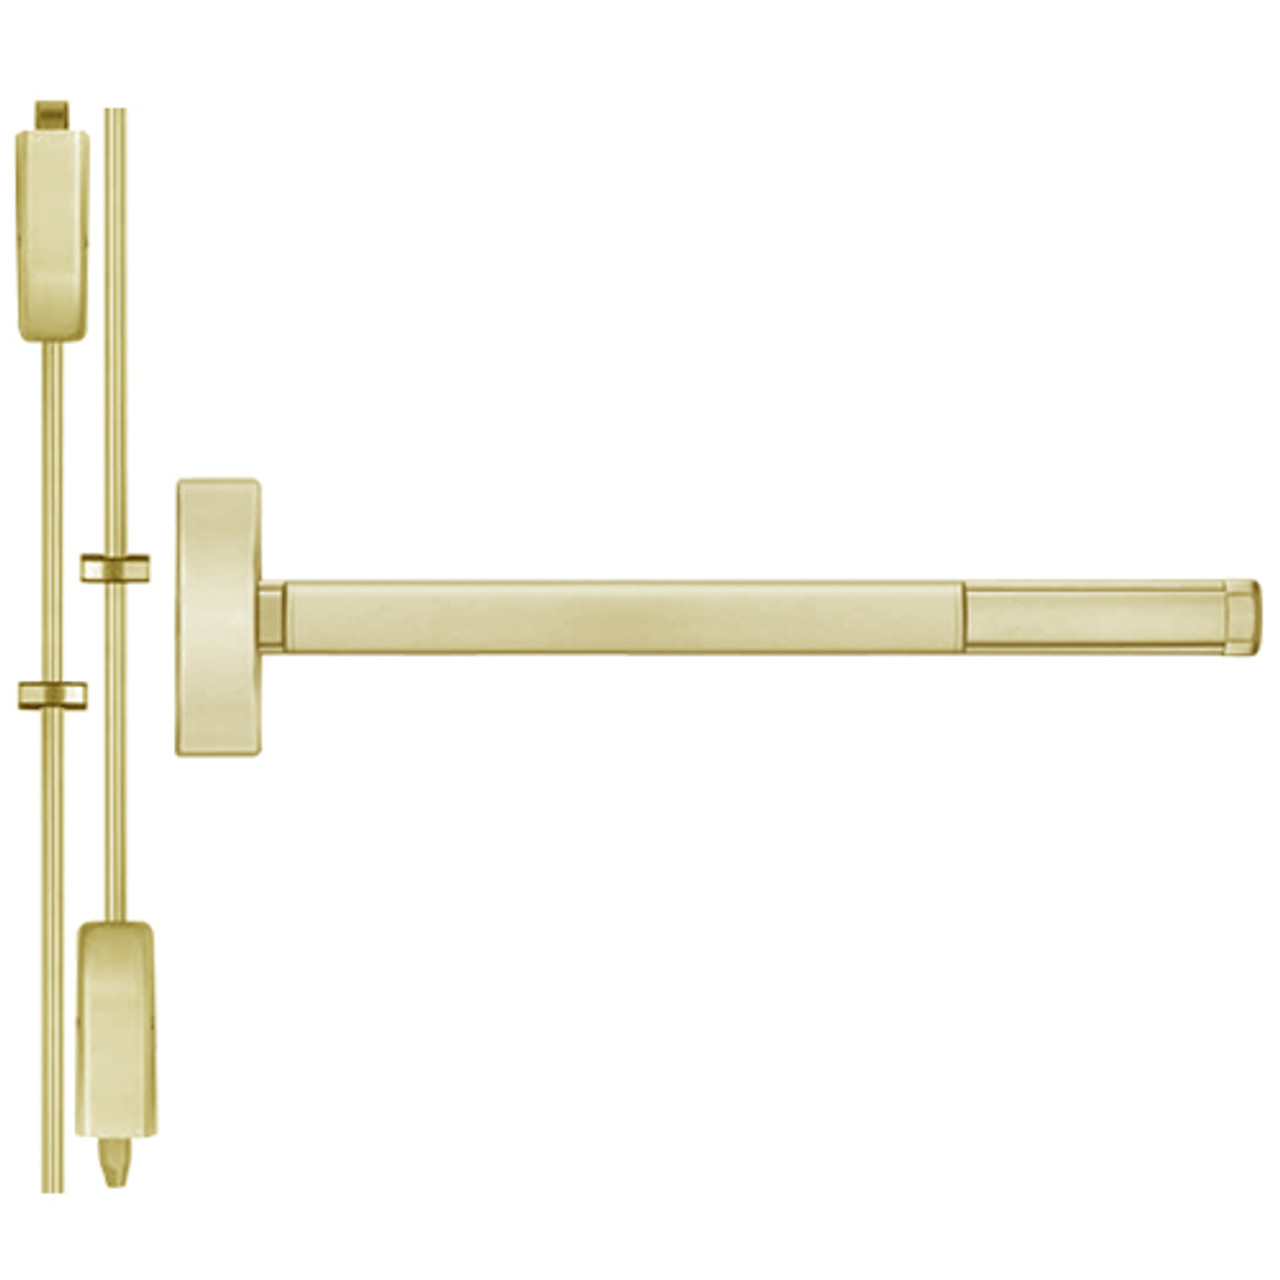 ELRFL2208LBR-606-36 PHI 2200 Series Apex Surface Vertical Rod Device with Electric Latch Retraction Prepped for Key Controls Lever/Knob in Satin Brass Finish